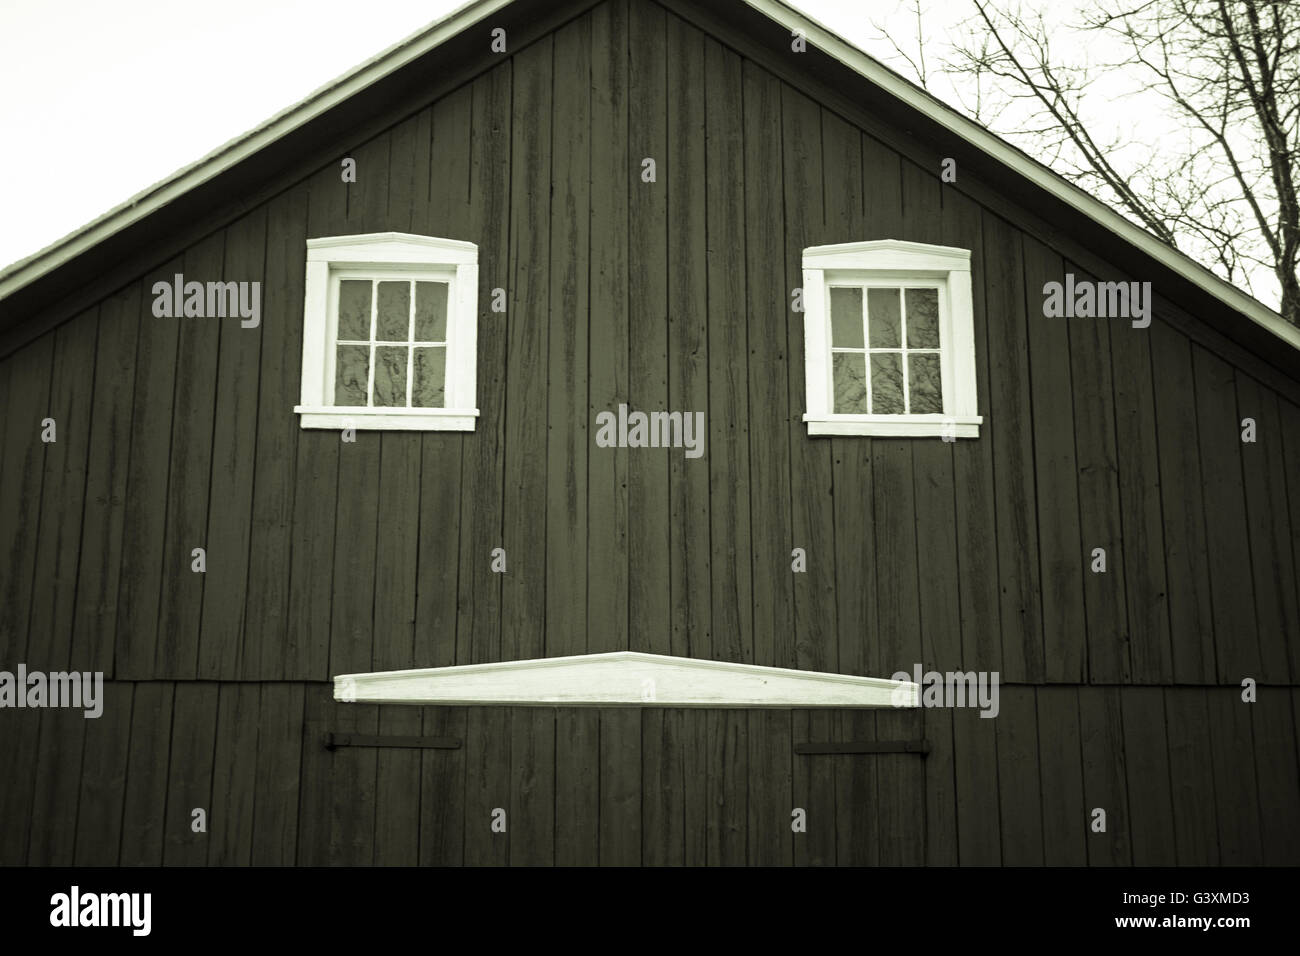 The Happy Barn. Front of a traditional wooden barn with an abstract smiley face in America's Midwest. Stock Photo